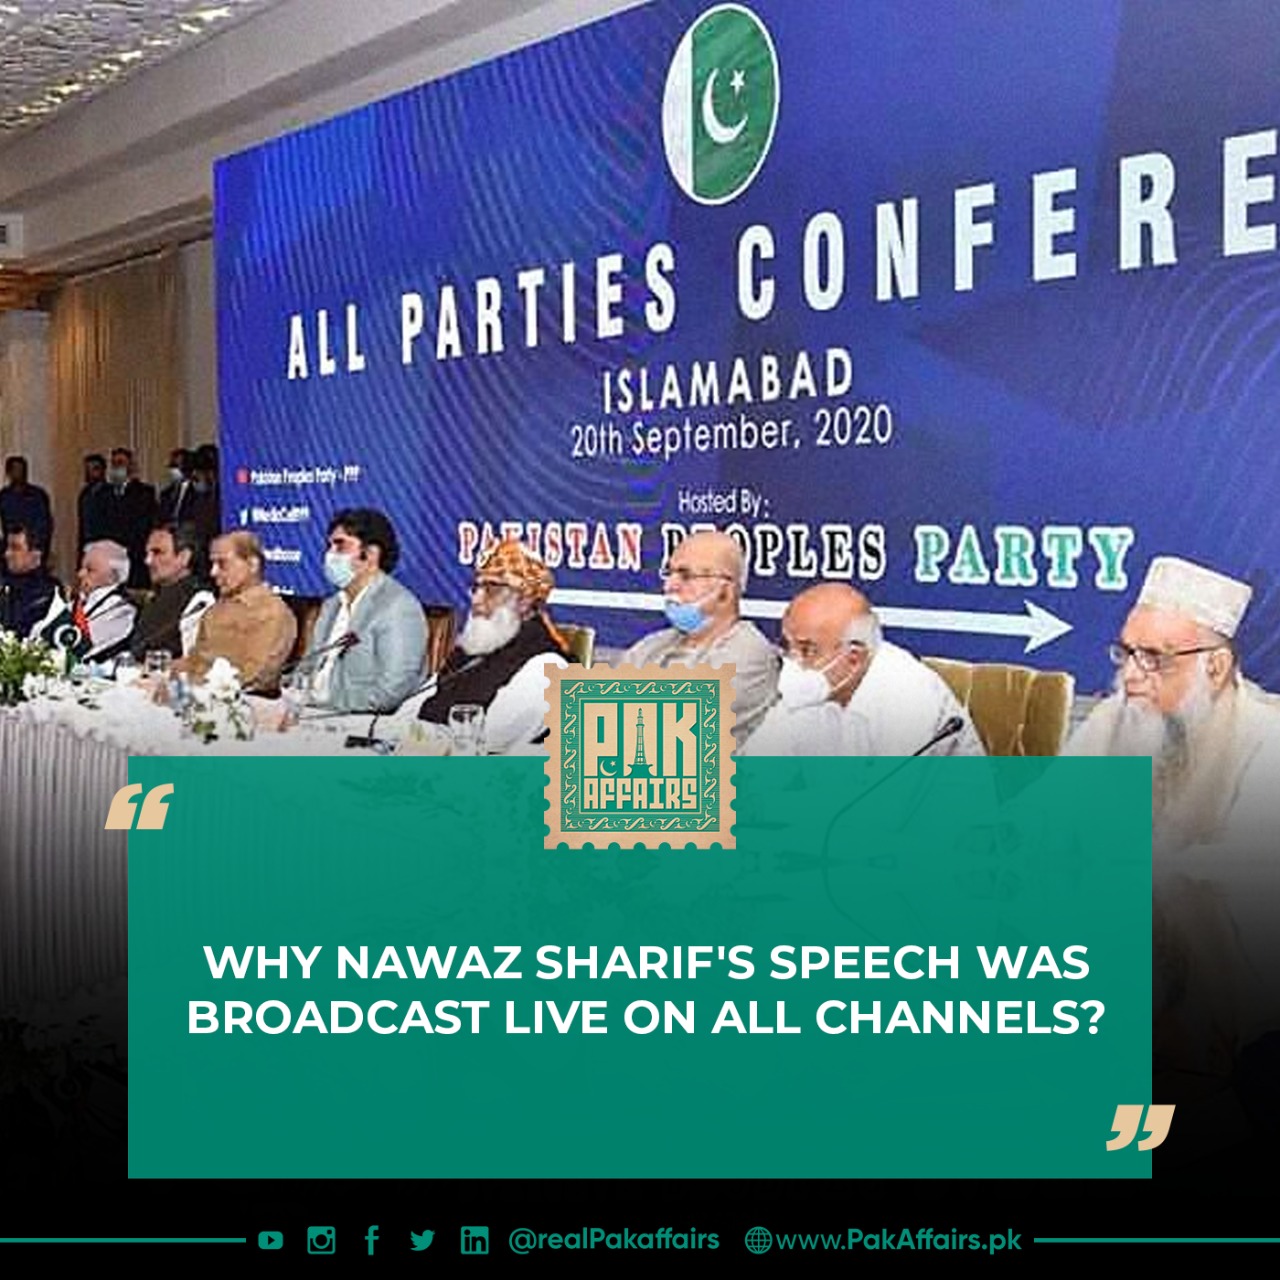 Why Nawaz Sharif's speech was broadcast live on all channels?